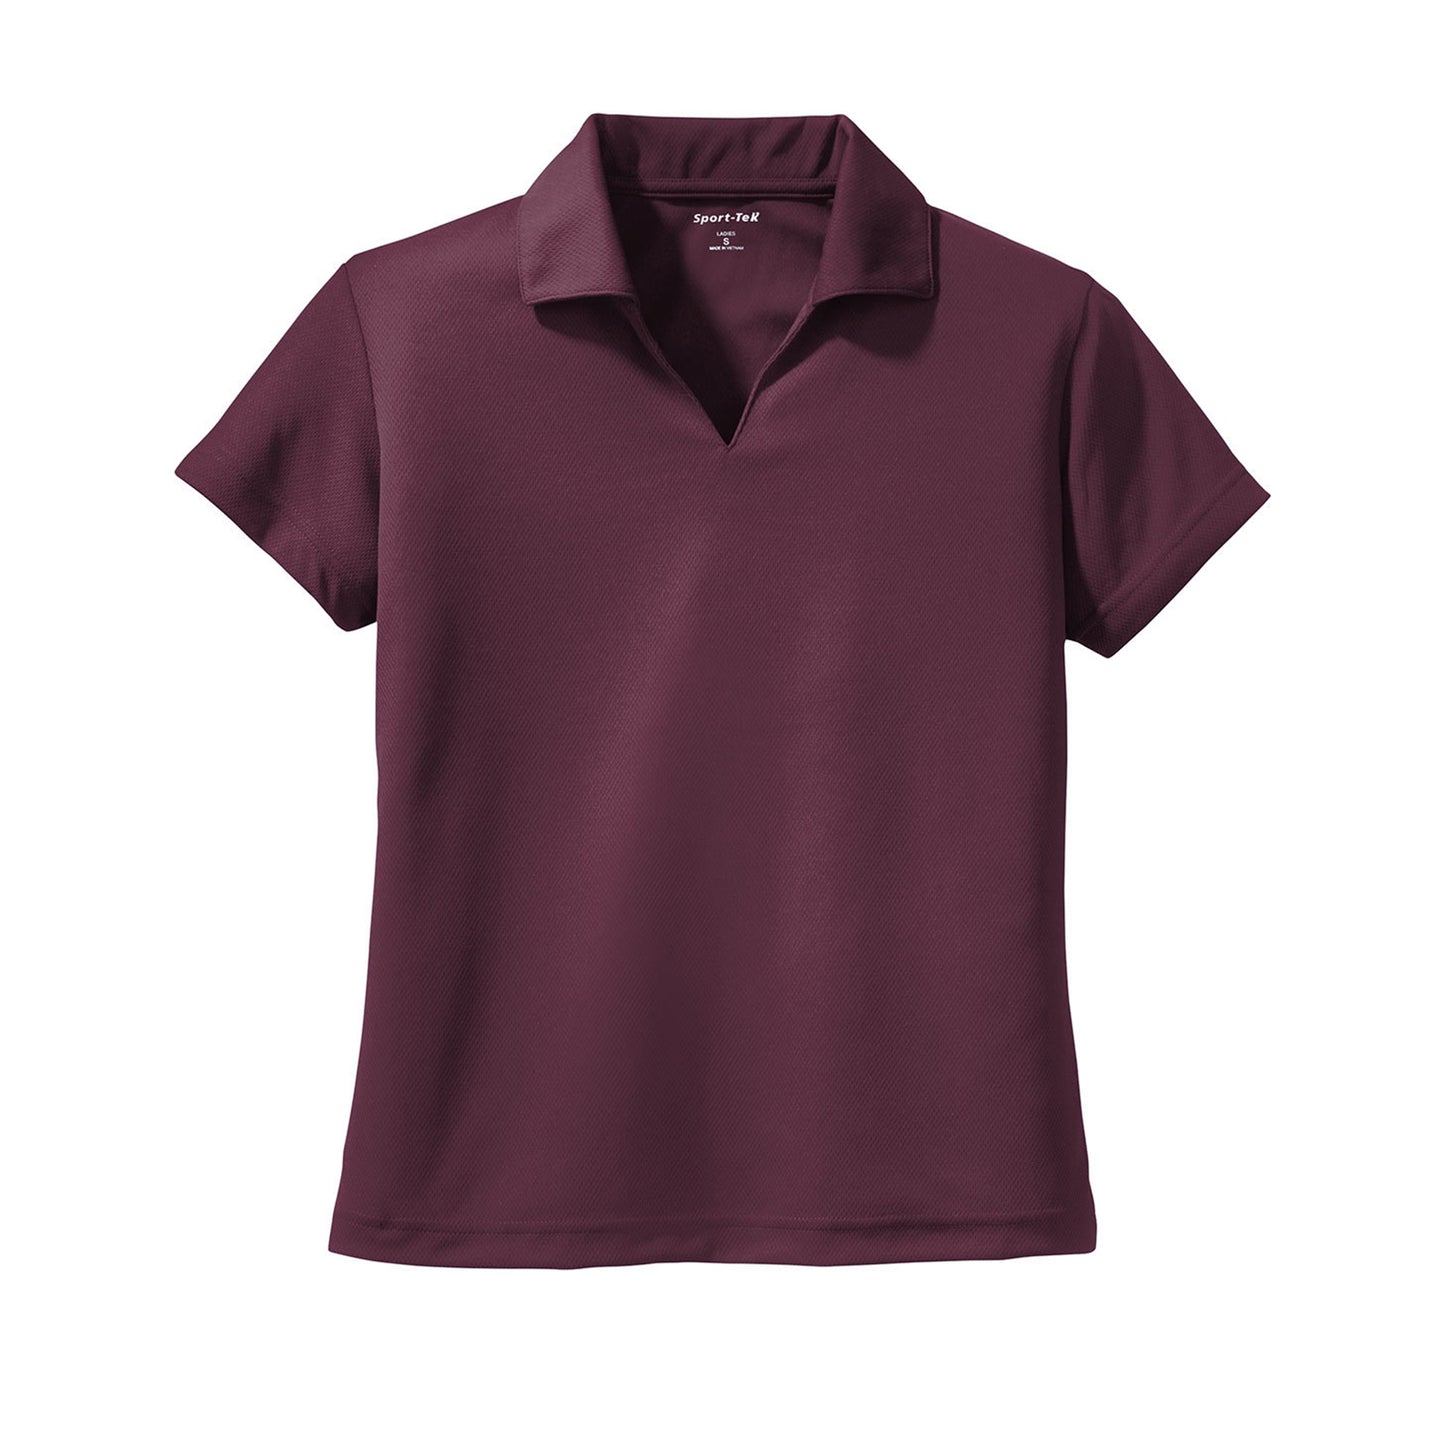 Customized Polo - Ladies' - Various Colors